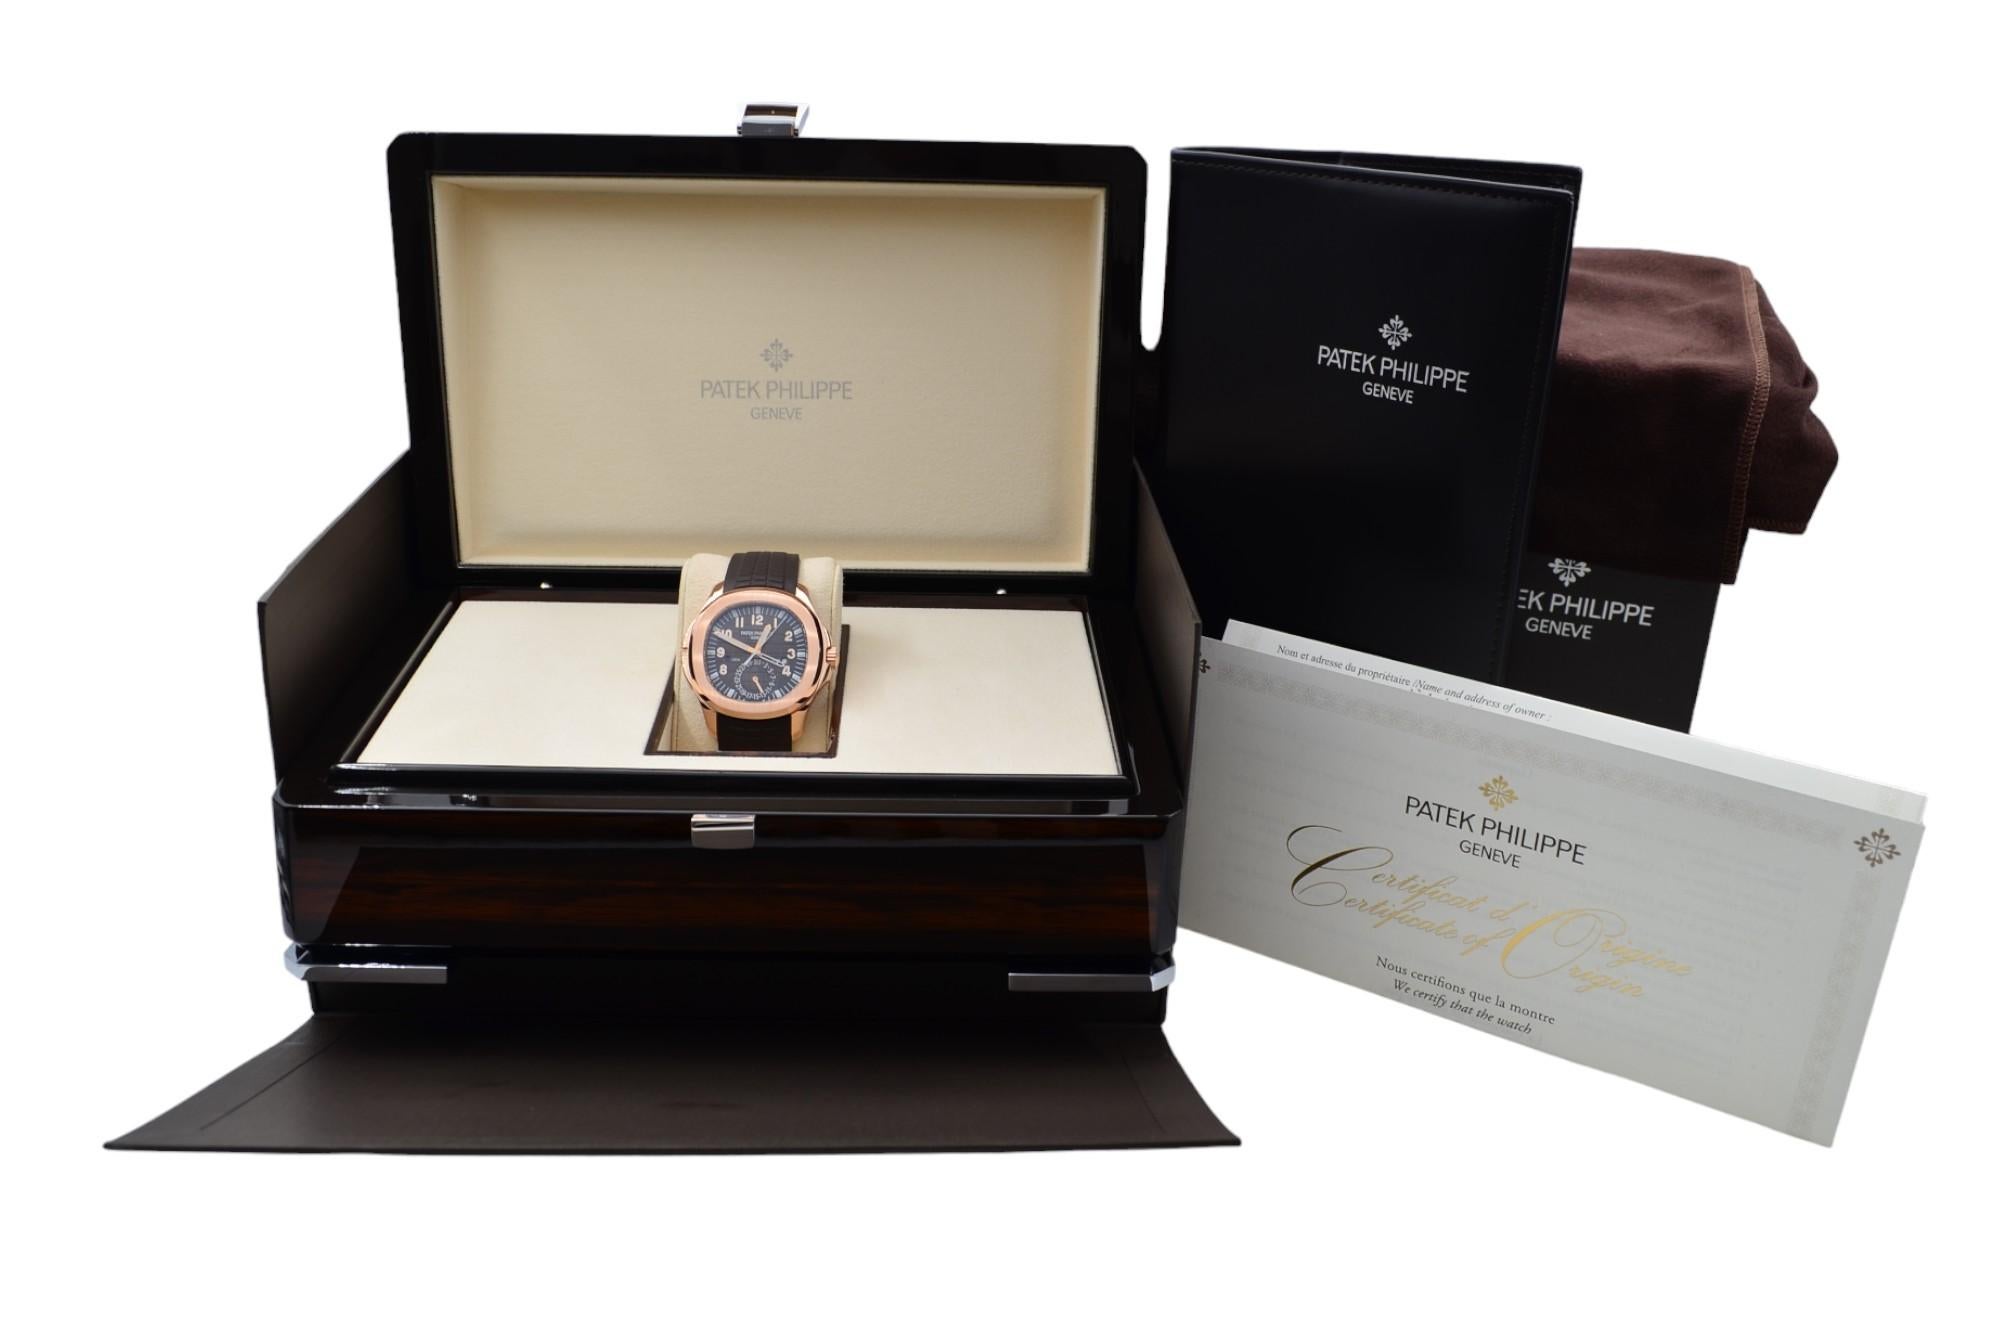 The watch is in a very good condition and it’s working well. The watch comes with the original box and documents from Patek Philippe, along with an AGS Jewelry warranty card. For more information about delivery, warranty and return, please check our